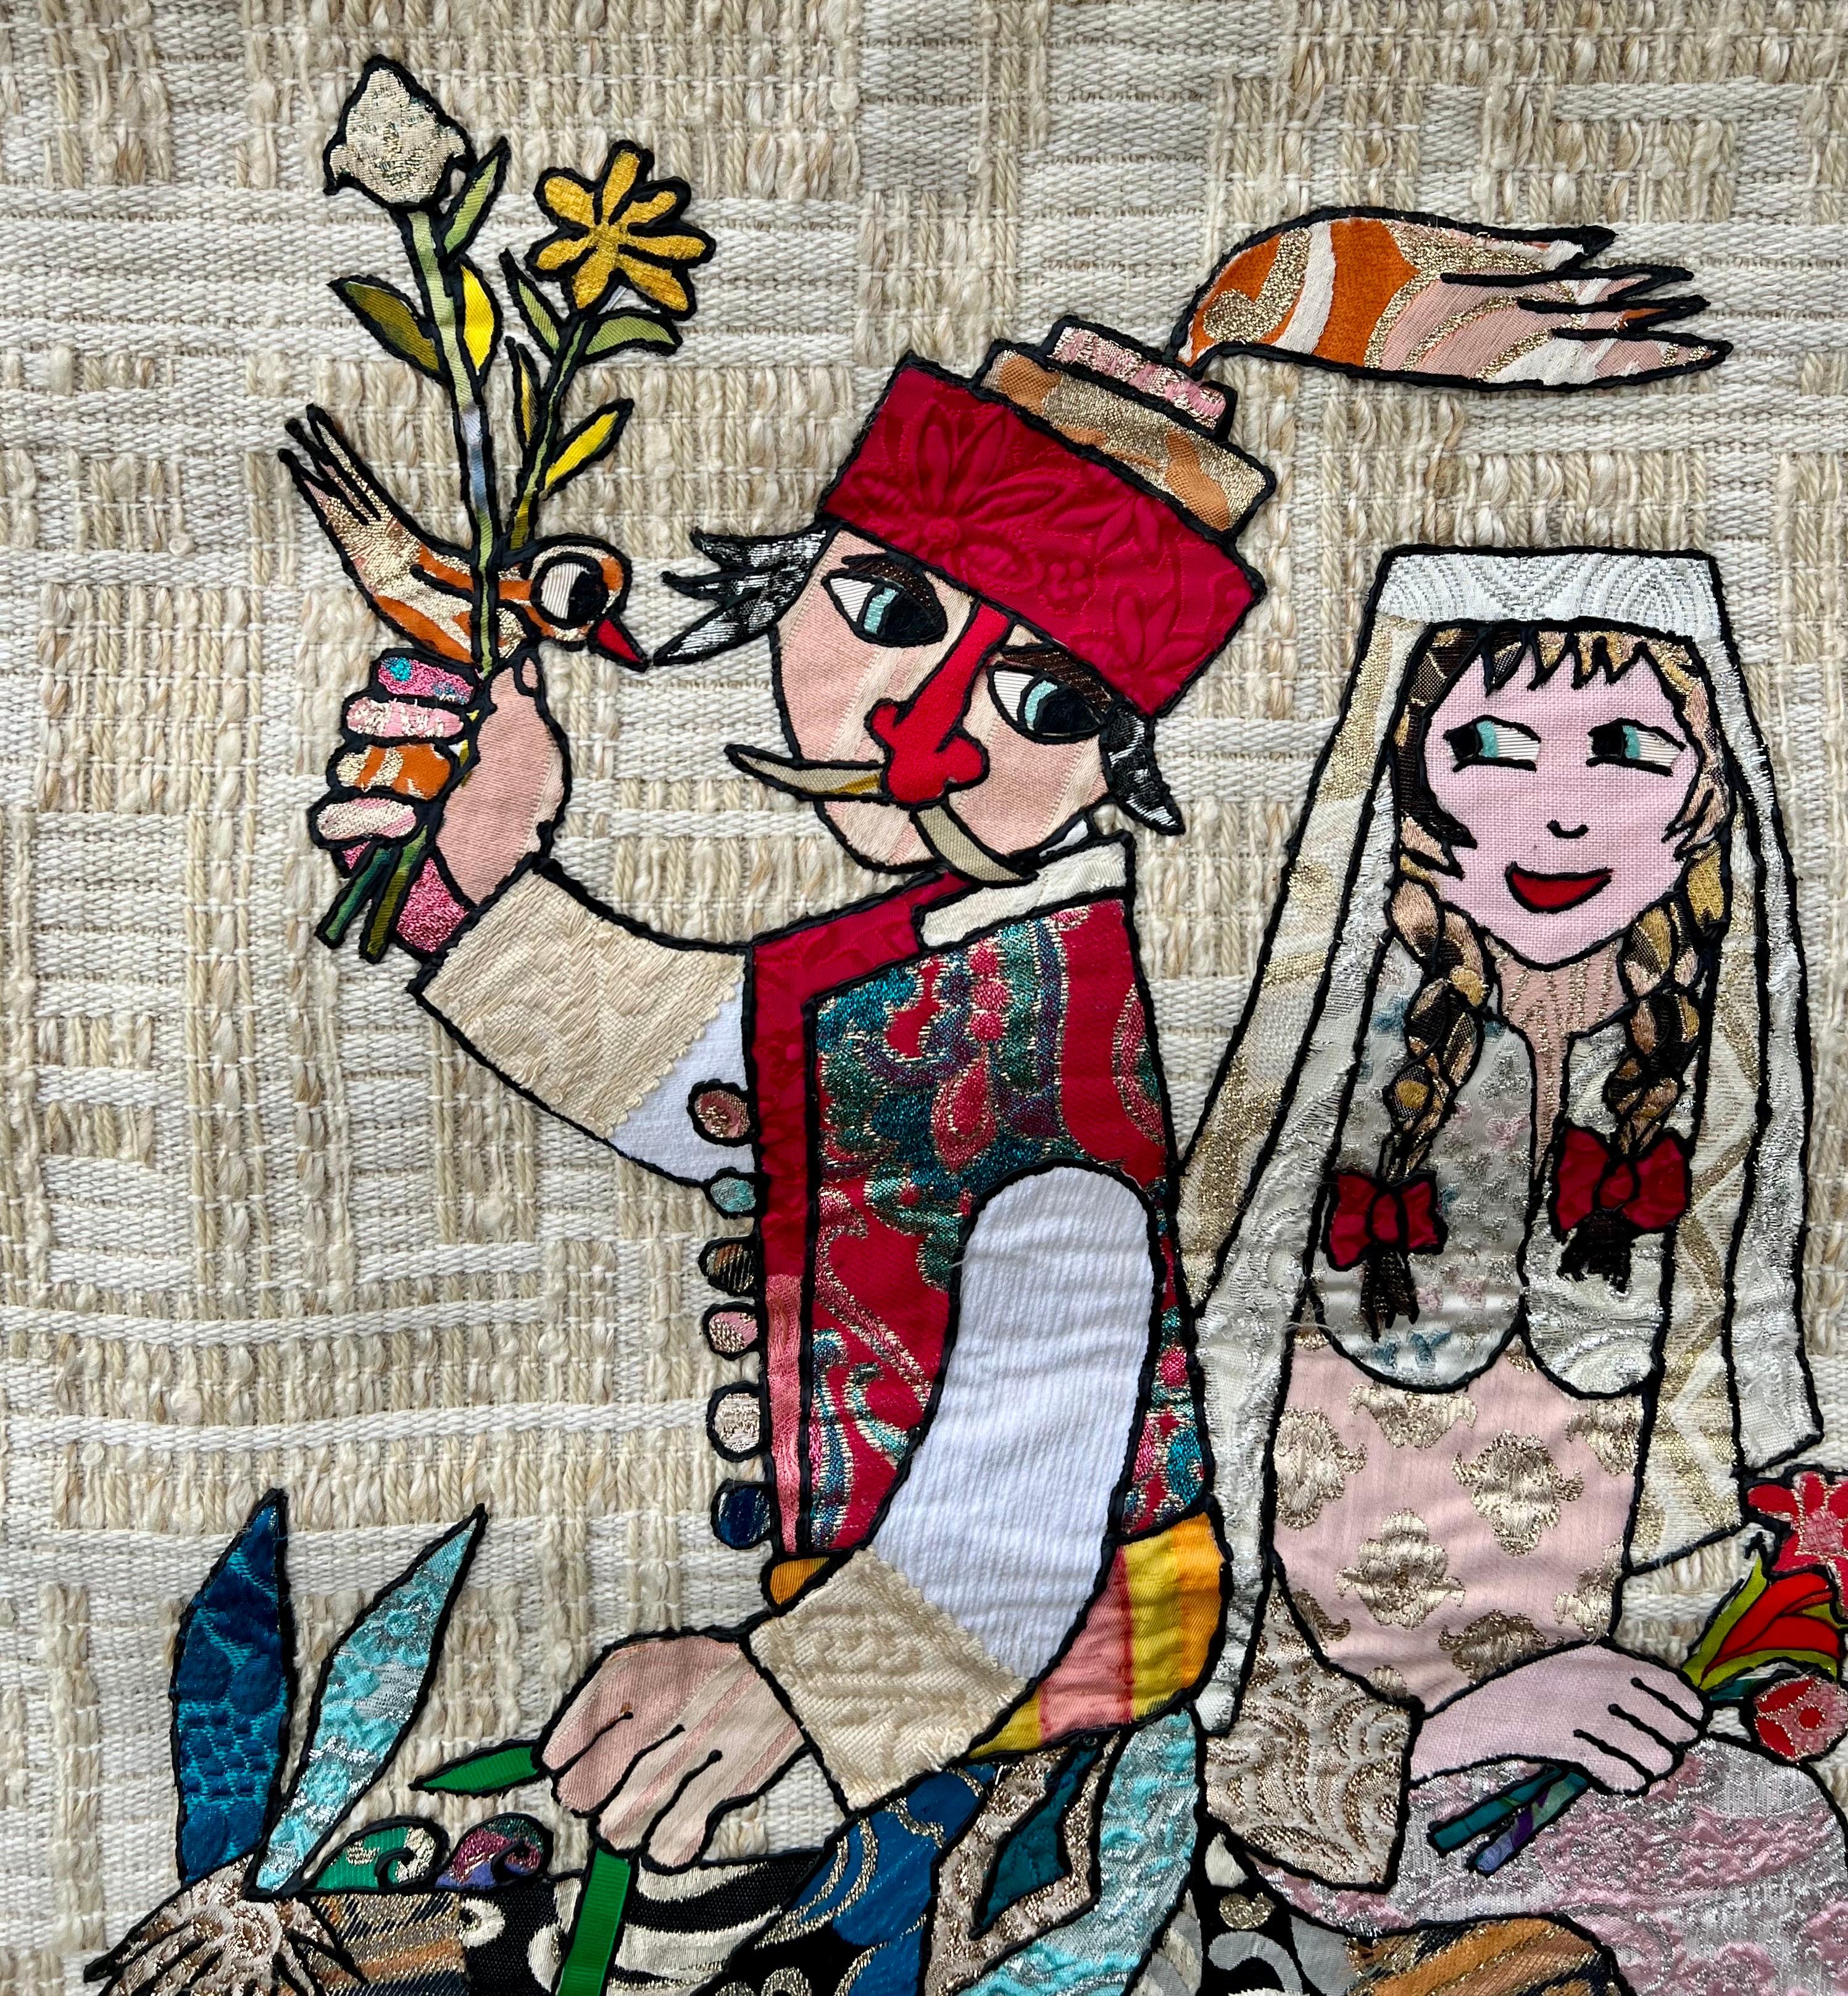 Naive European French Folk Art Jovan Lazar Obican Tapestry Wall Hanging Weaving For Sale 7